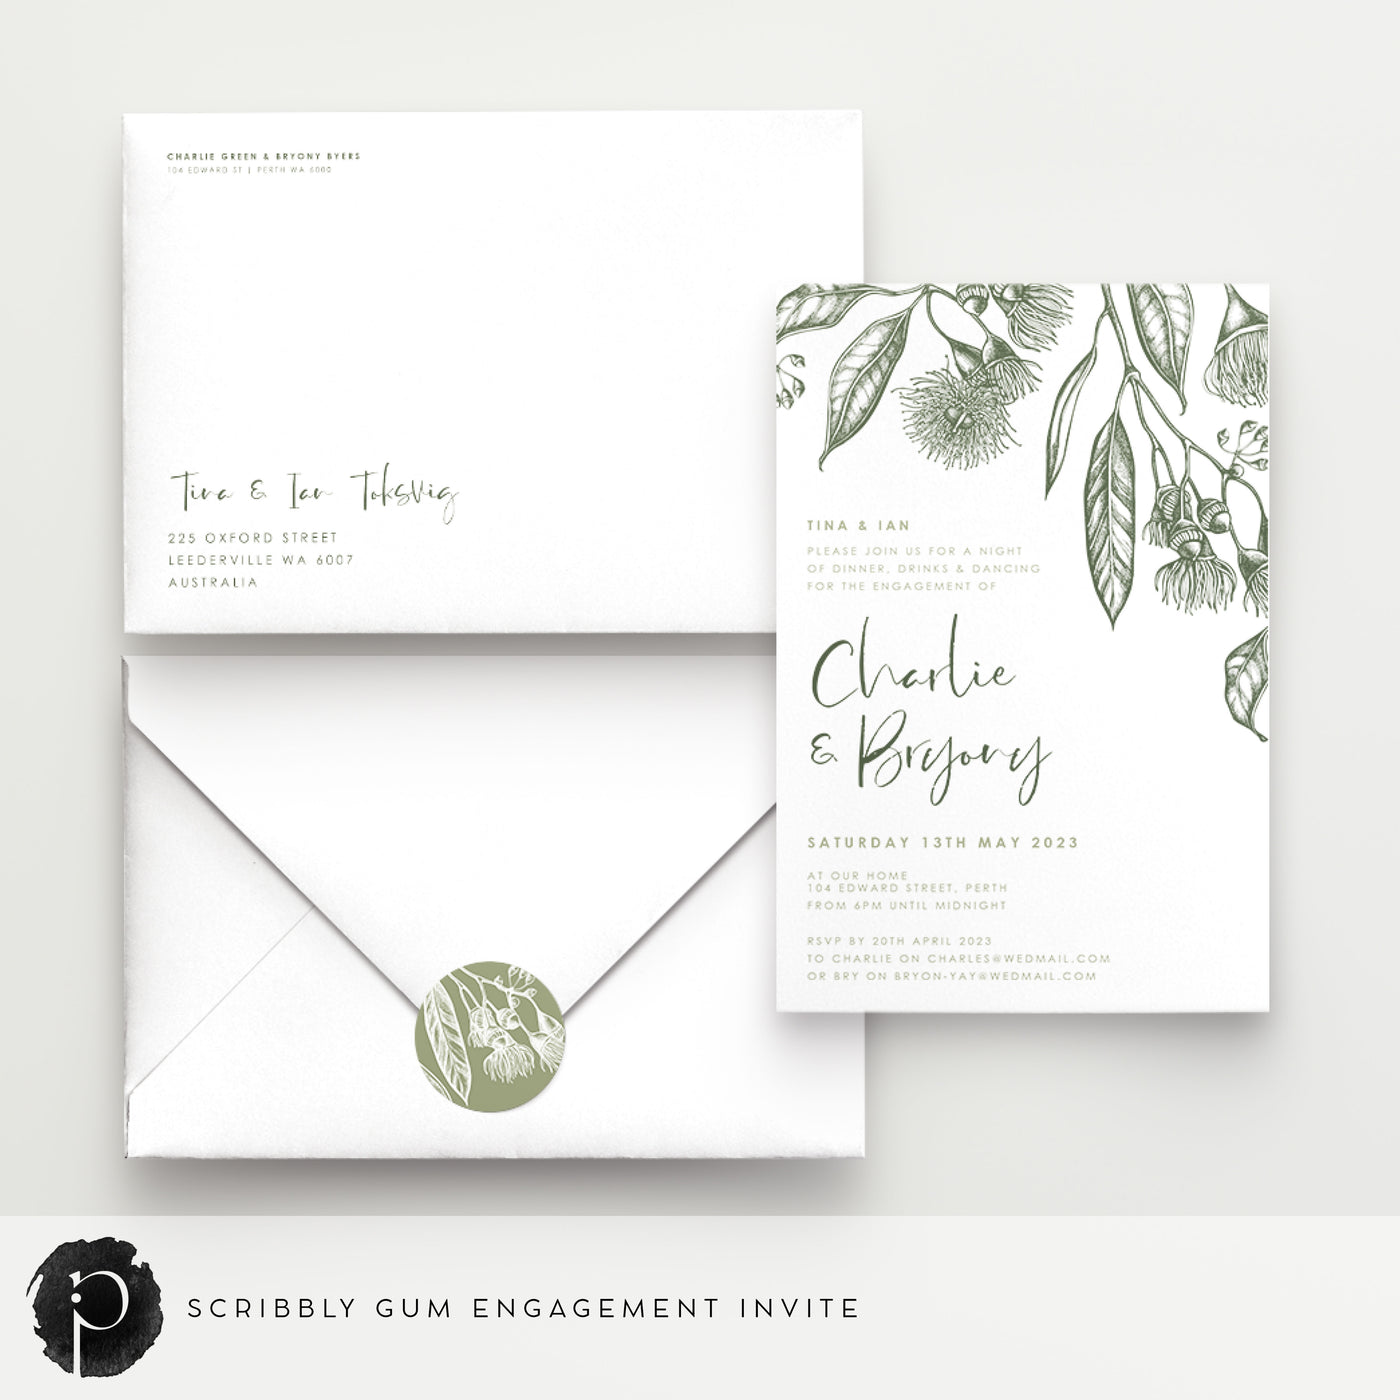 Scribbly Gum - Engagement Invitations